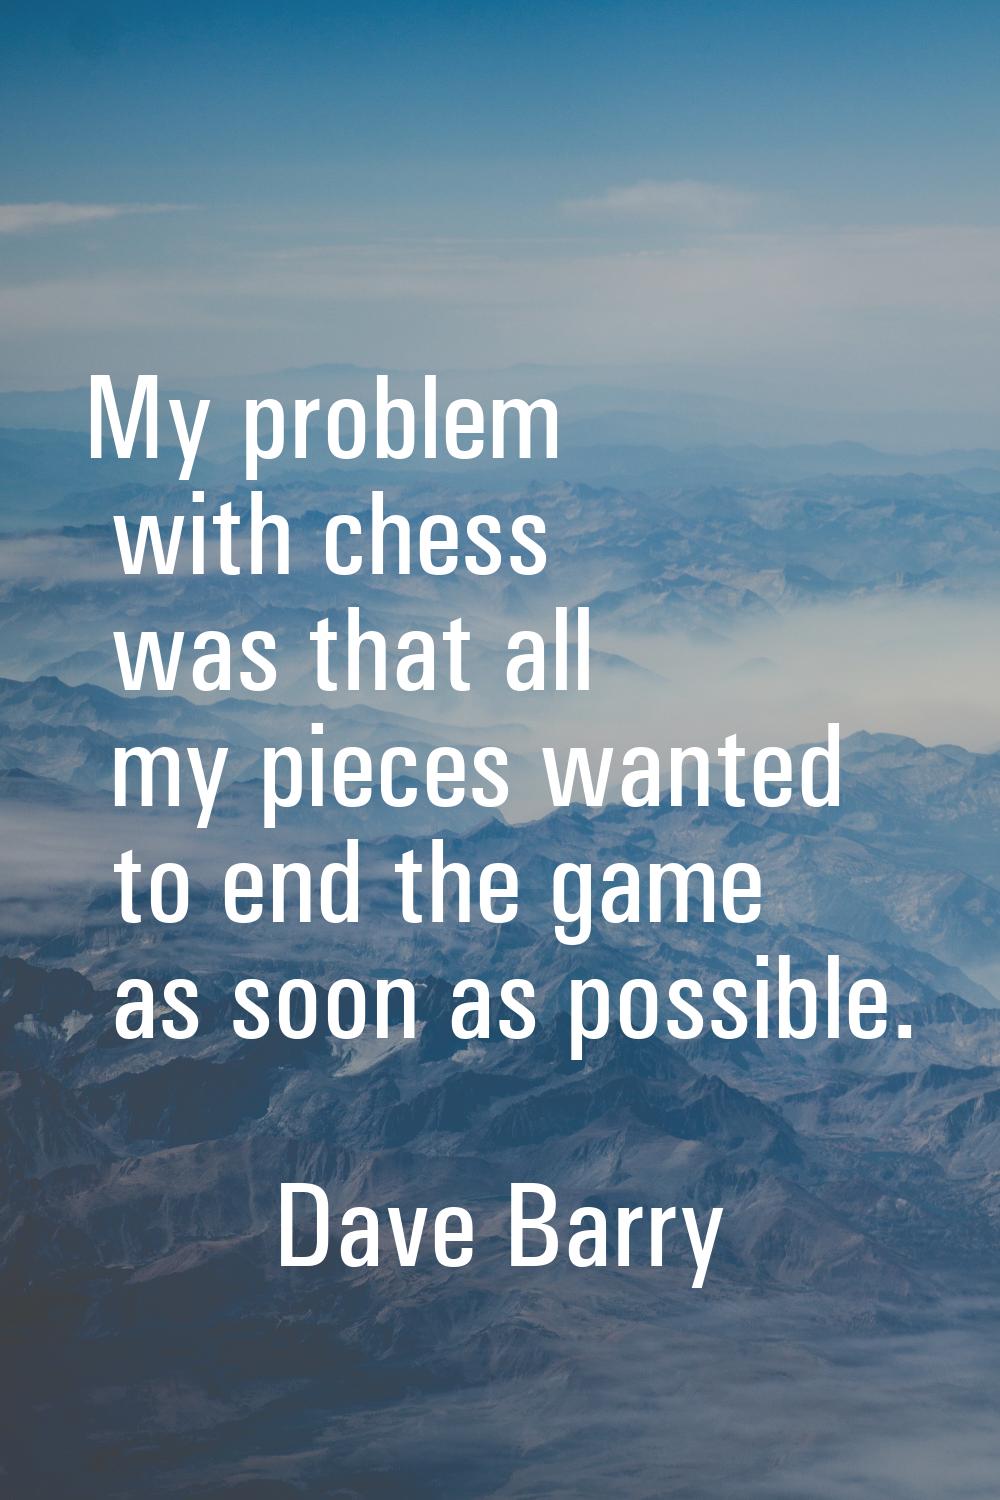 My problem with chess was that all my pieces wanted to end the game as soon as possible.